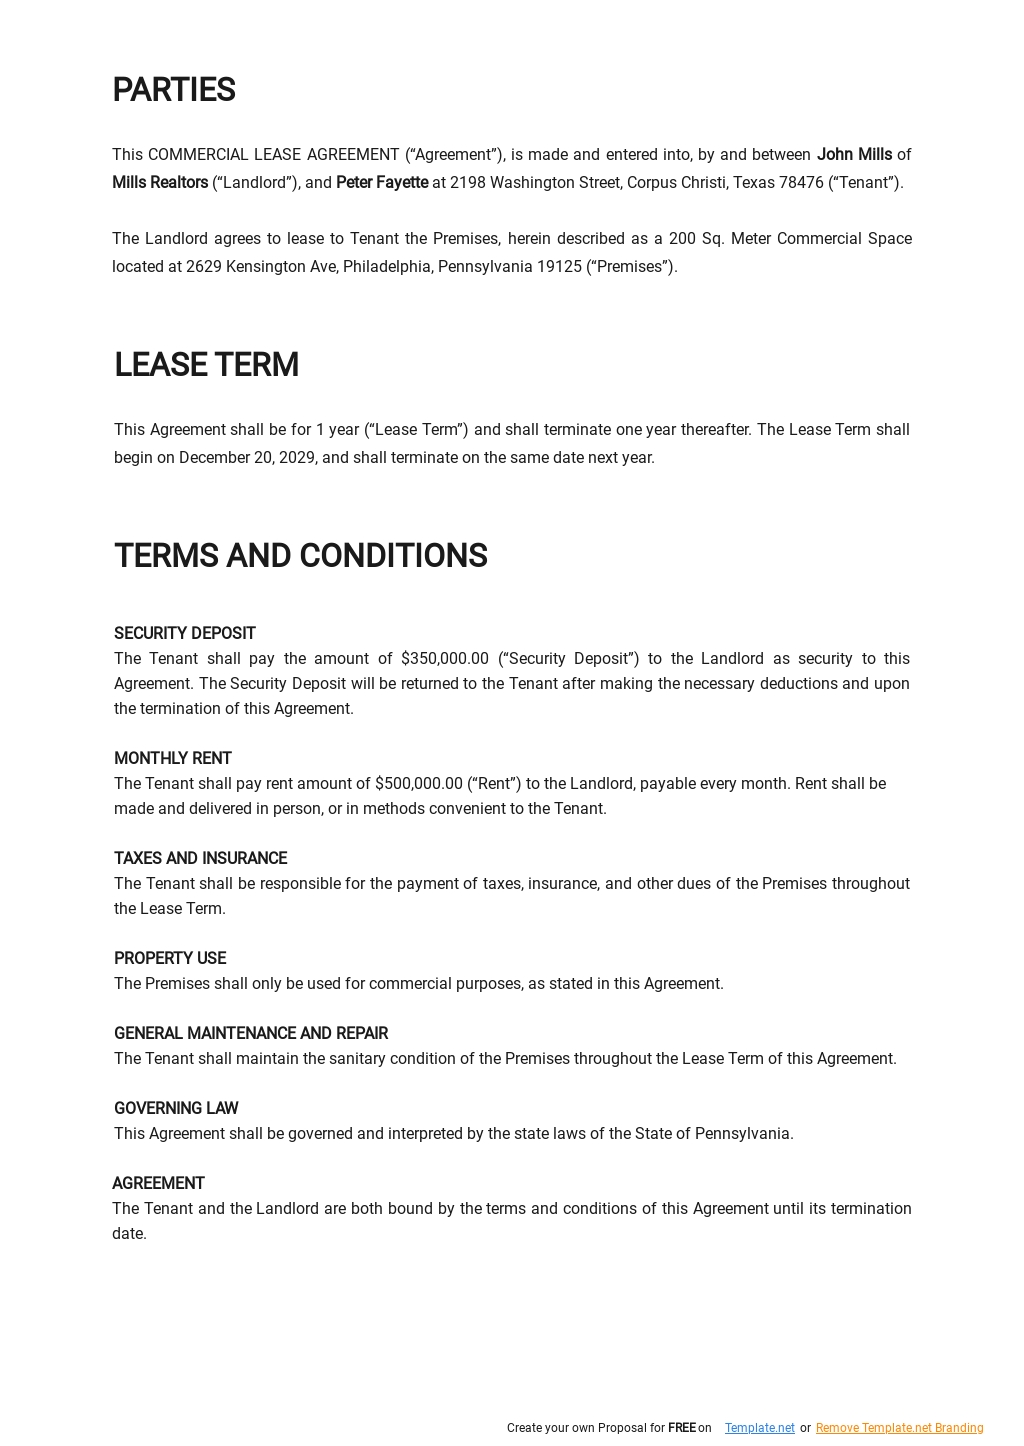 Simple Commercial Lease Agreement Template 1.jpe